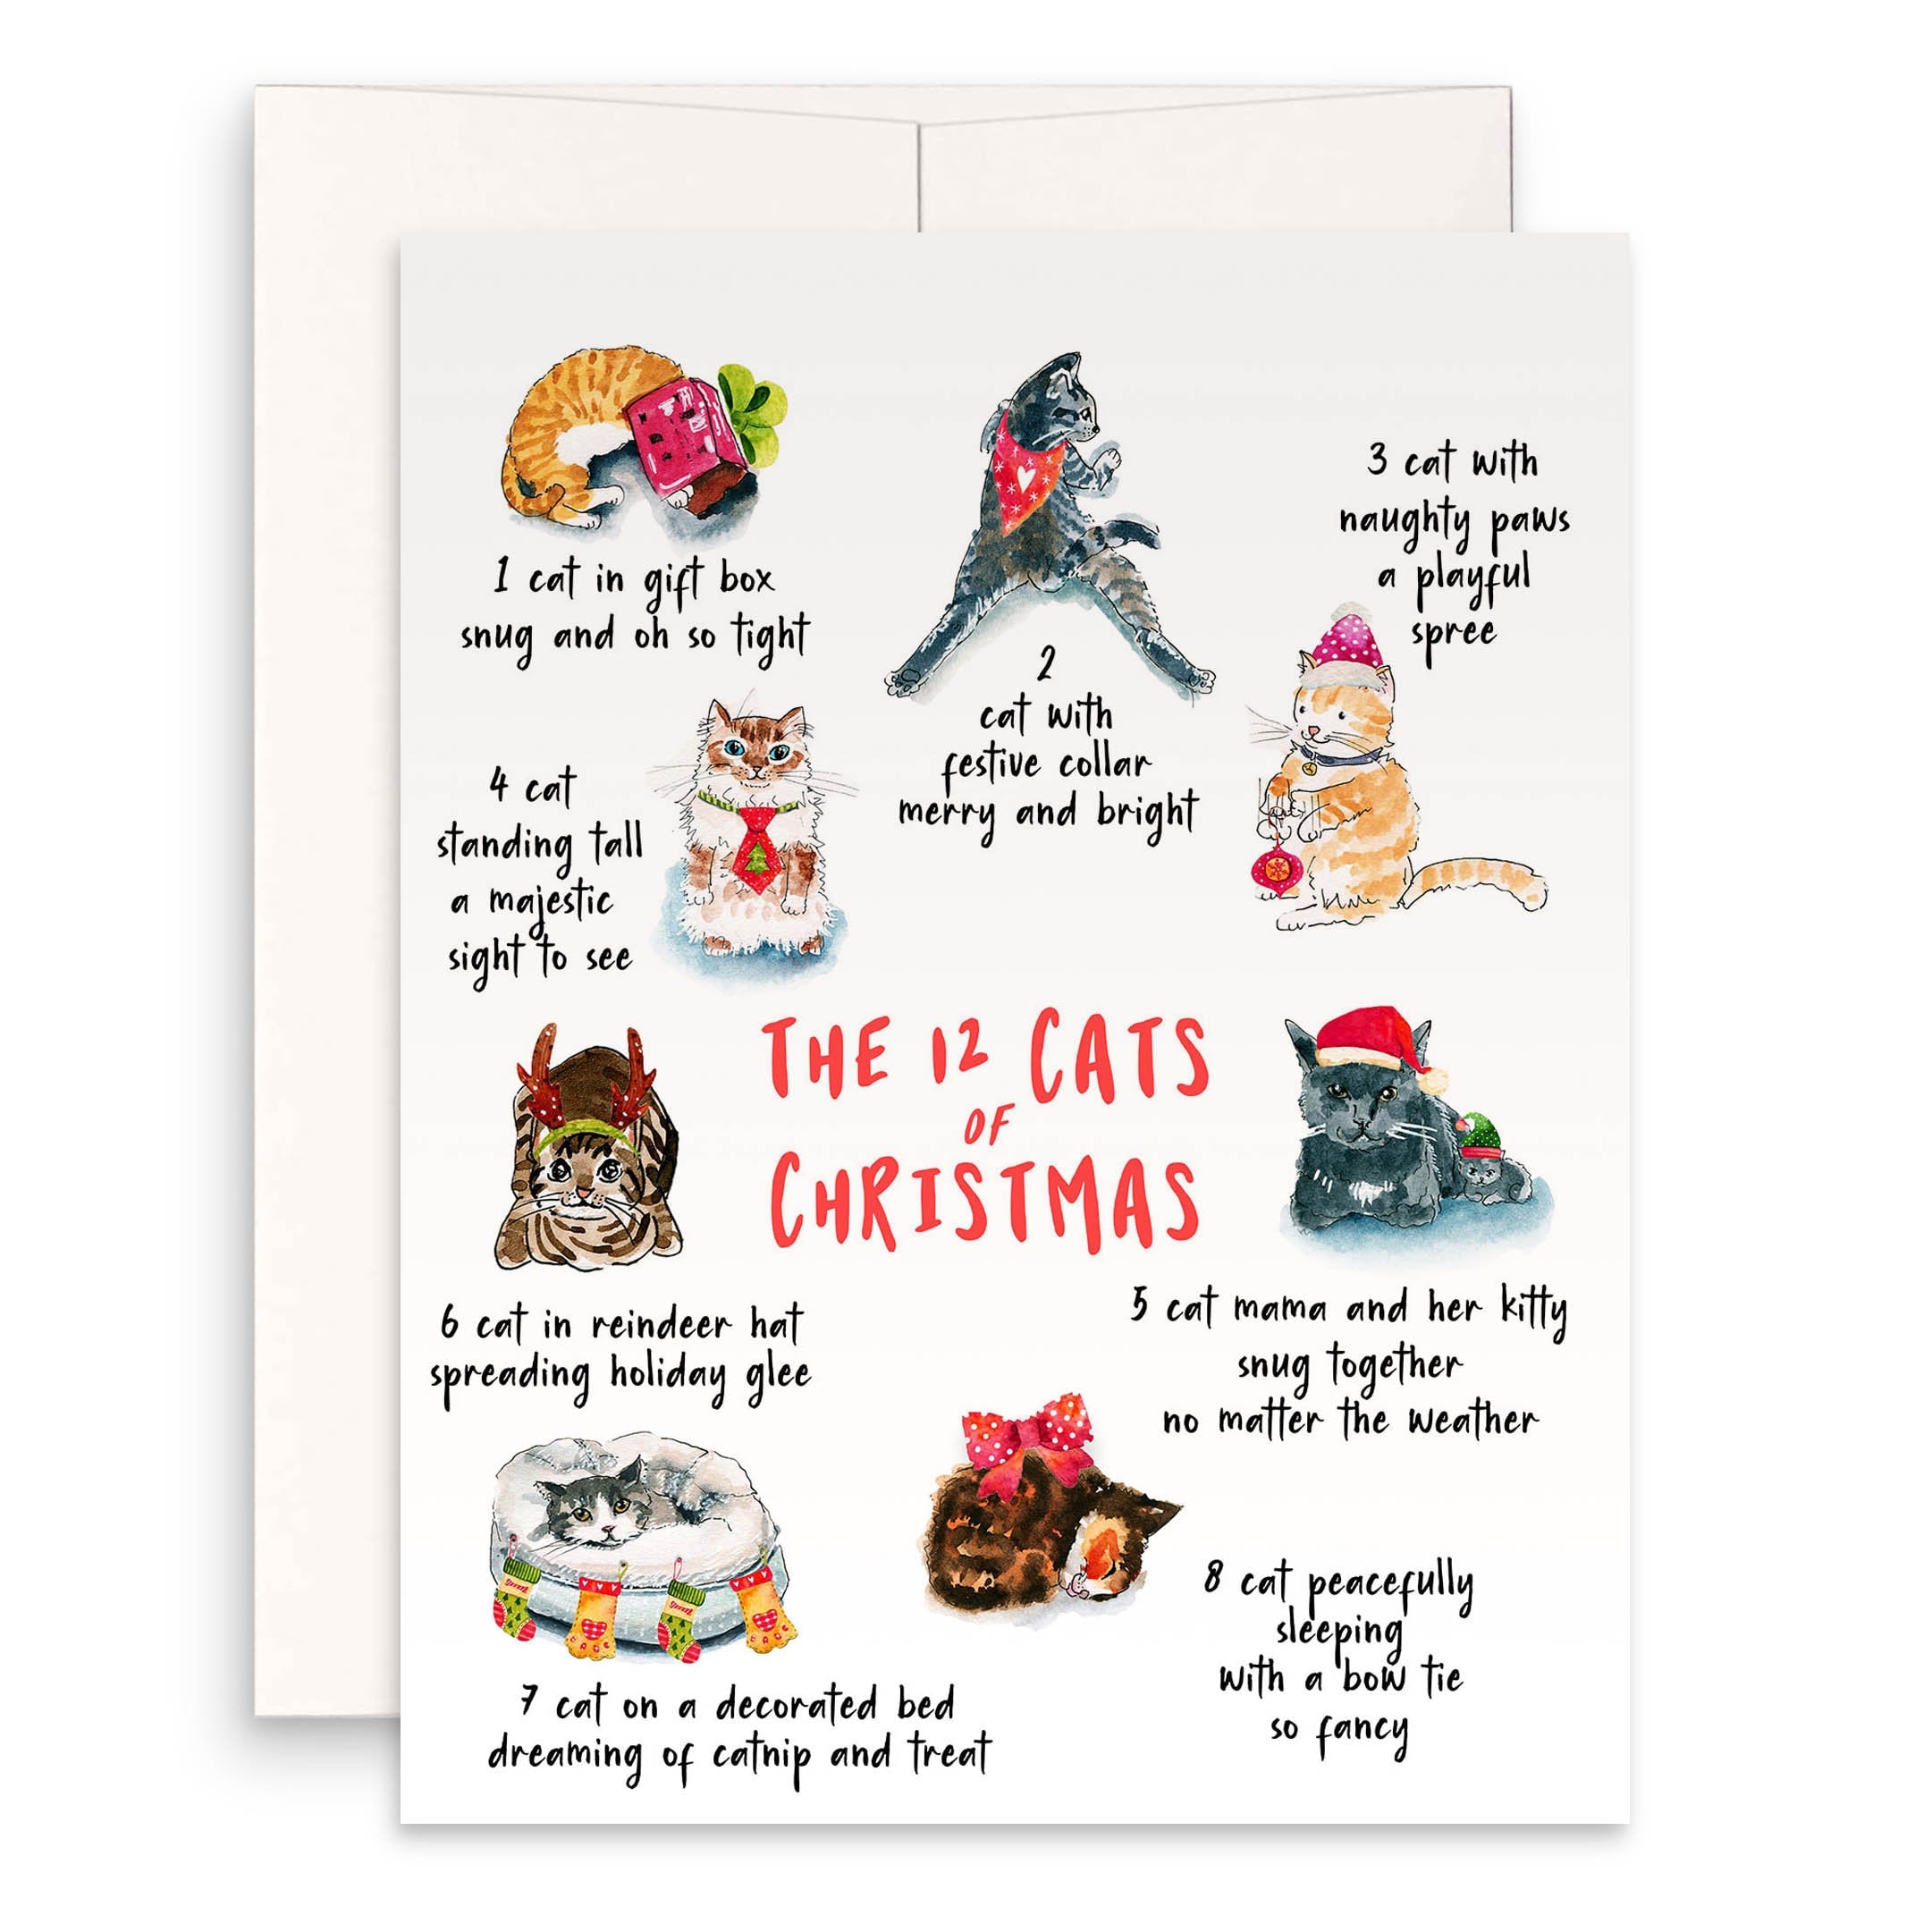 Funny Cat Christmas Cards 12 Days Of Christmas Ts For Cat Lovers Handmade By Liyana 5364